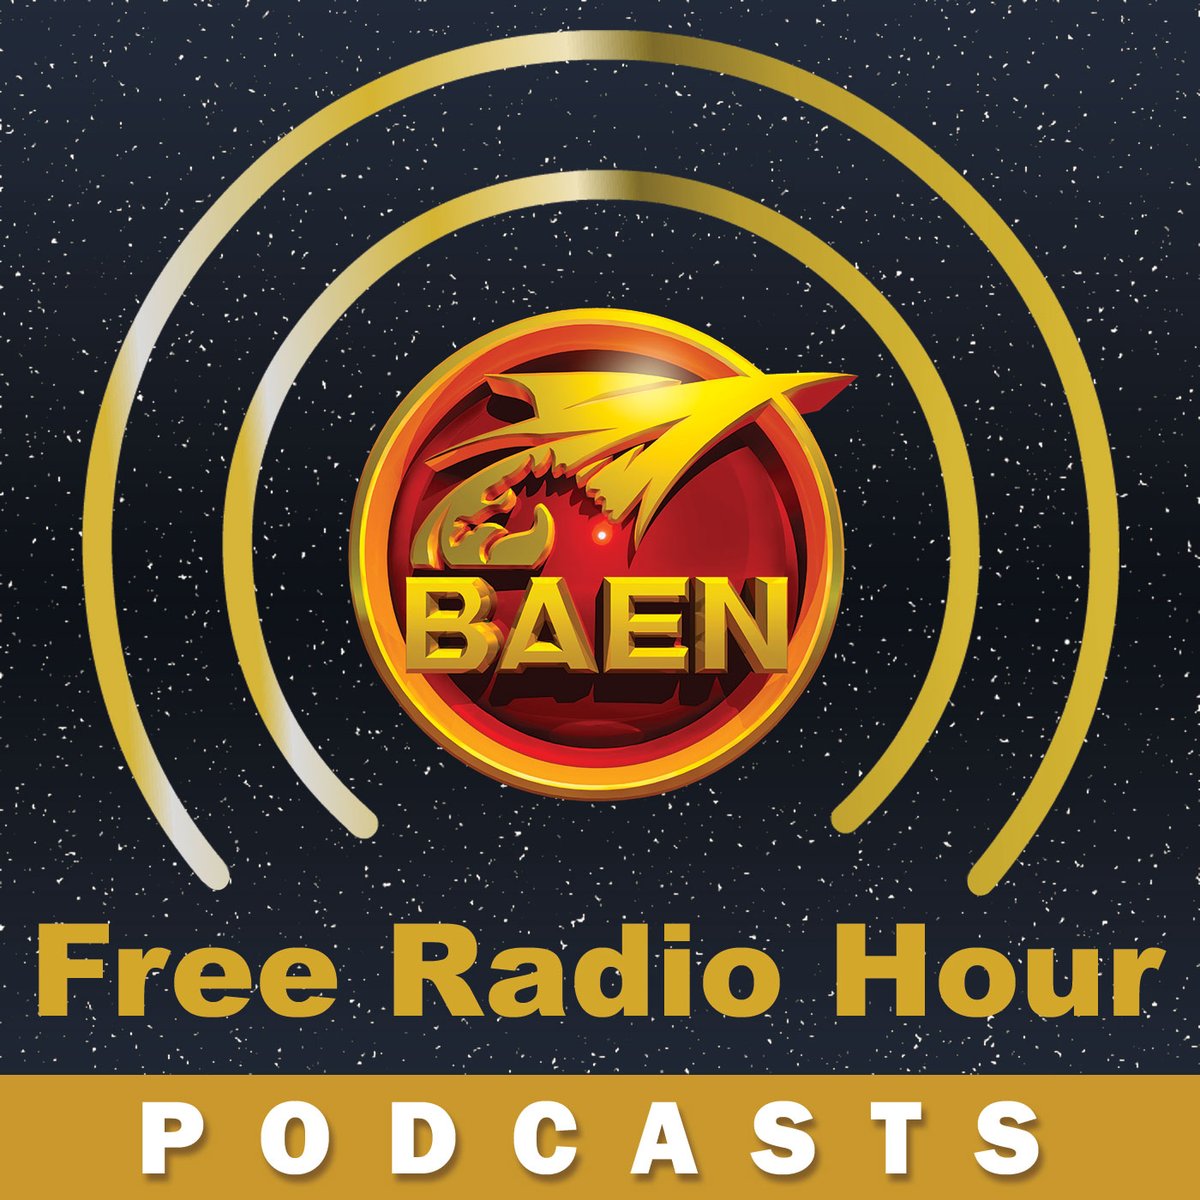 This week on the Baen Free Radio Hour, Part Two of @cegannon1 and Chris Kennedy discussing their latest novel, 'ADMIRAL AND COMMANDER.' Also, Part 50 of 'TINKER' by Wen Spencer is read. baen.com/podcast/index/… #BFRH #AdmiralandCommander #ChuckGannon #ChrisKennedy #Tinker…